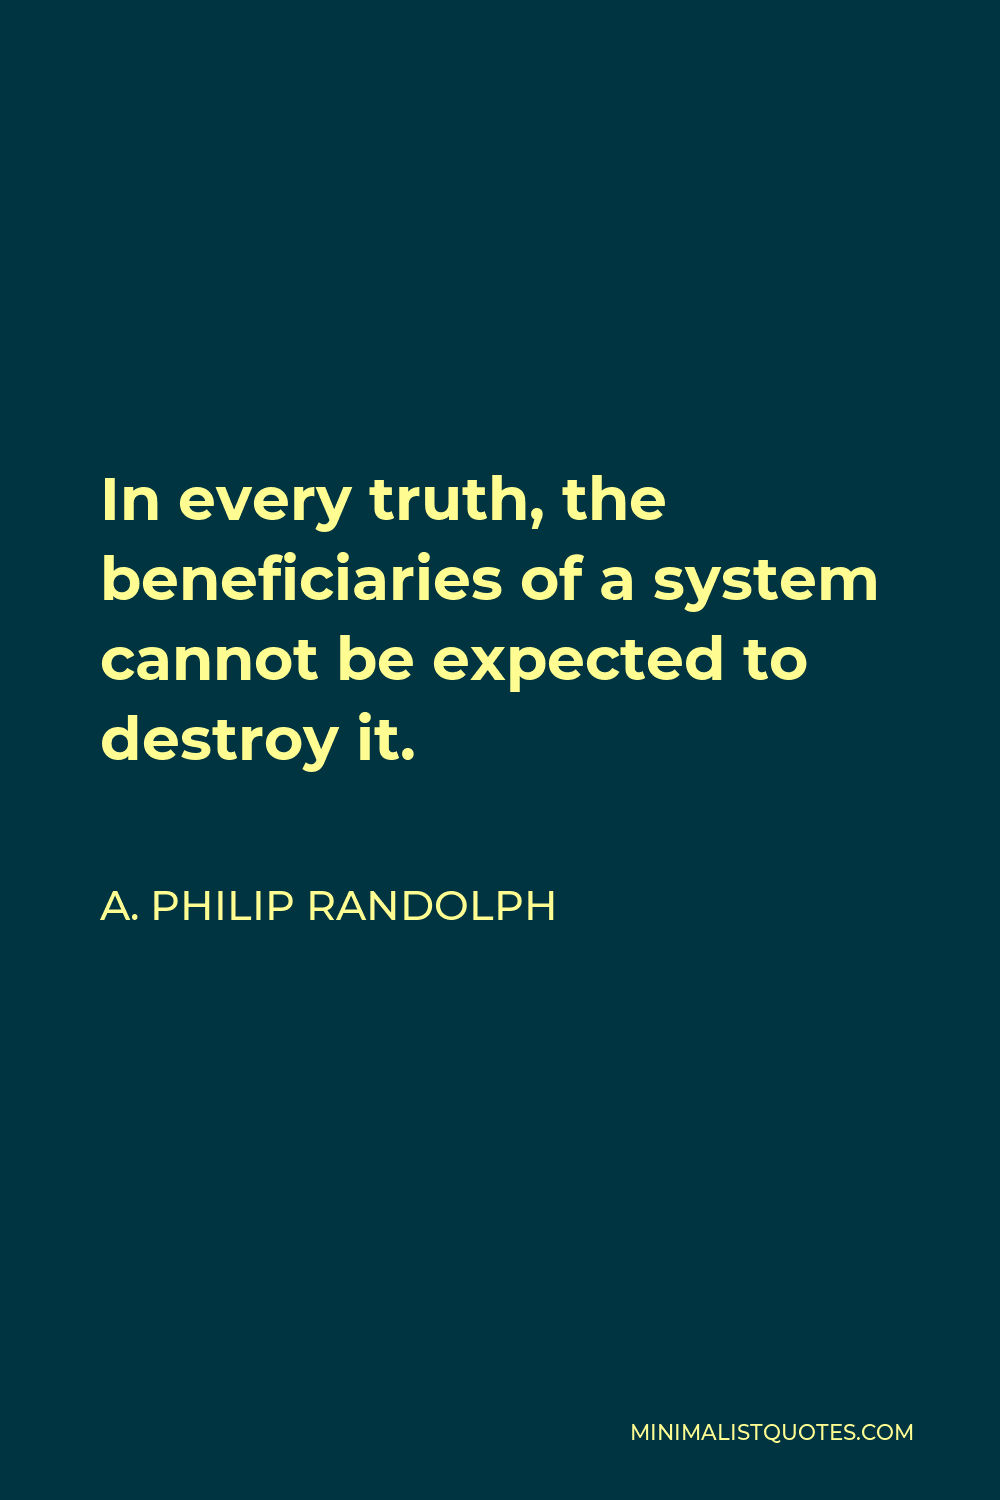 A. Philip Randolph Quote - In every truth, the beneficiaries of a system cannot be expected to destroy it.